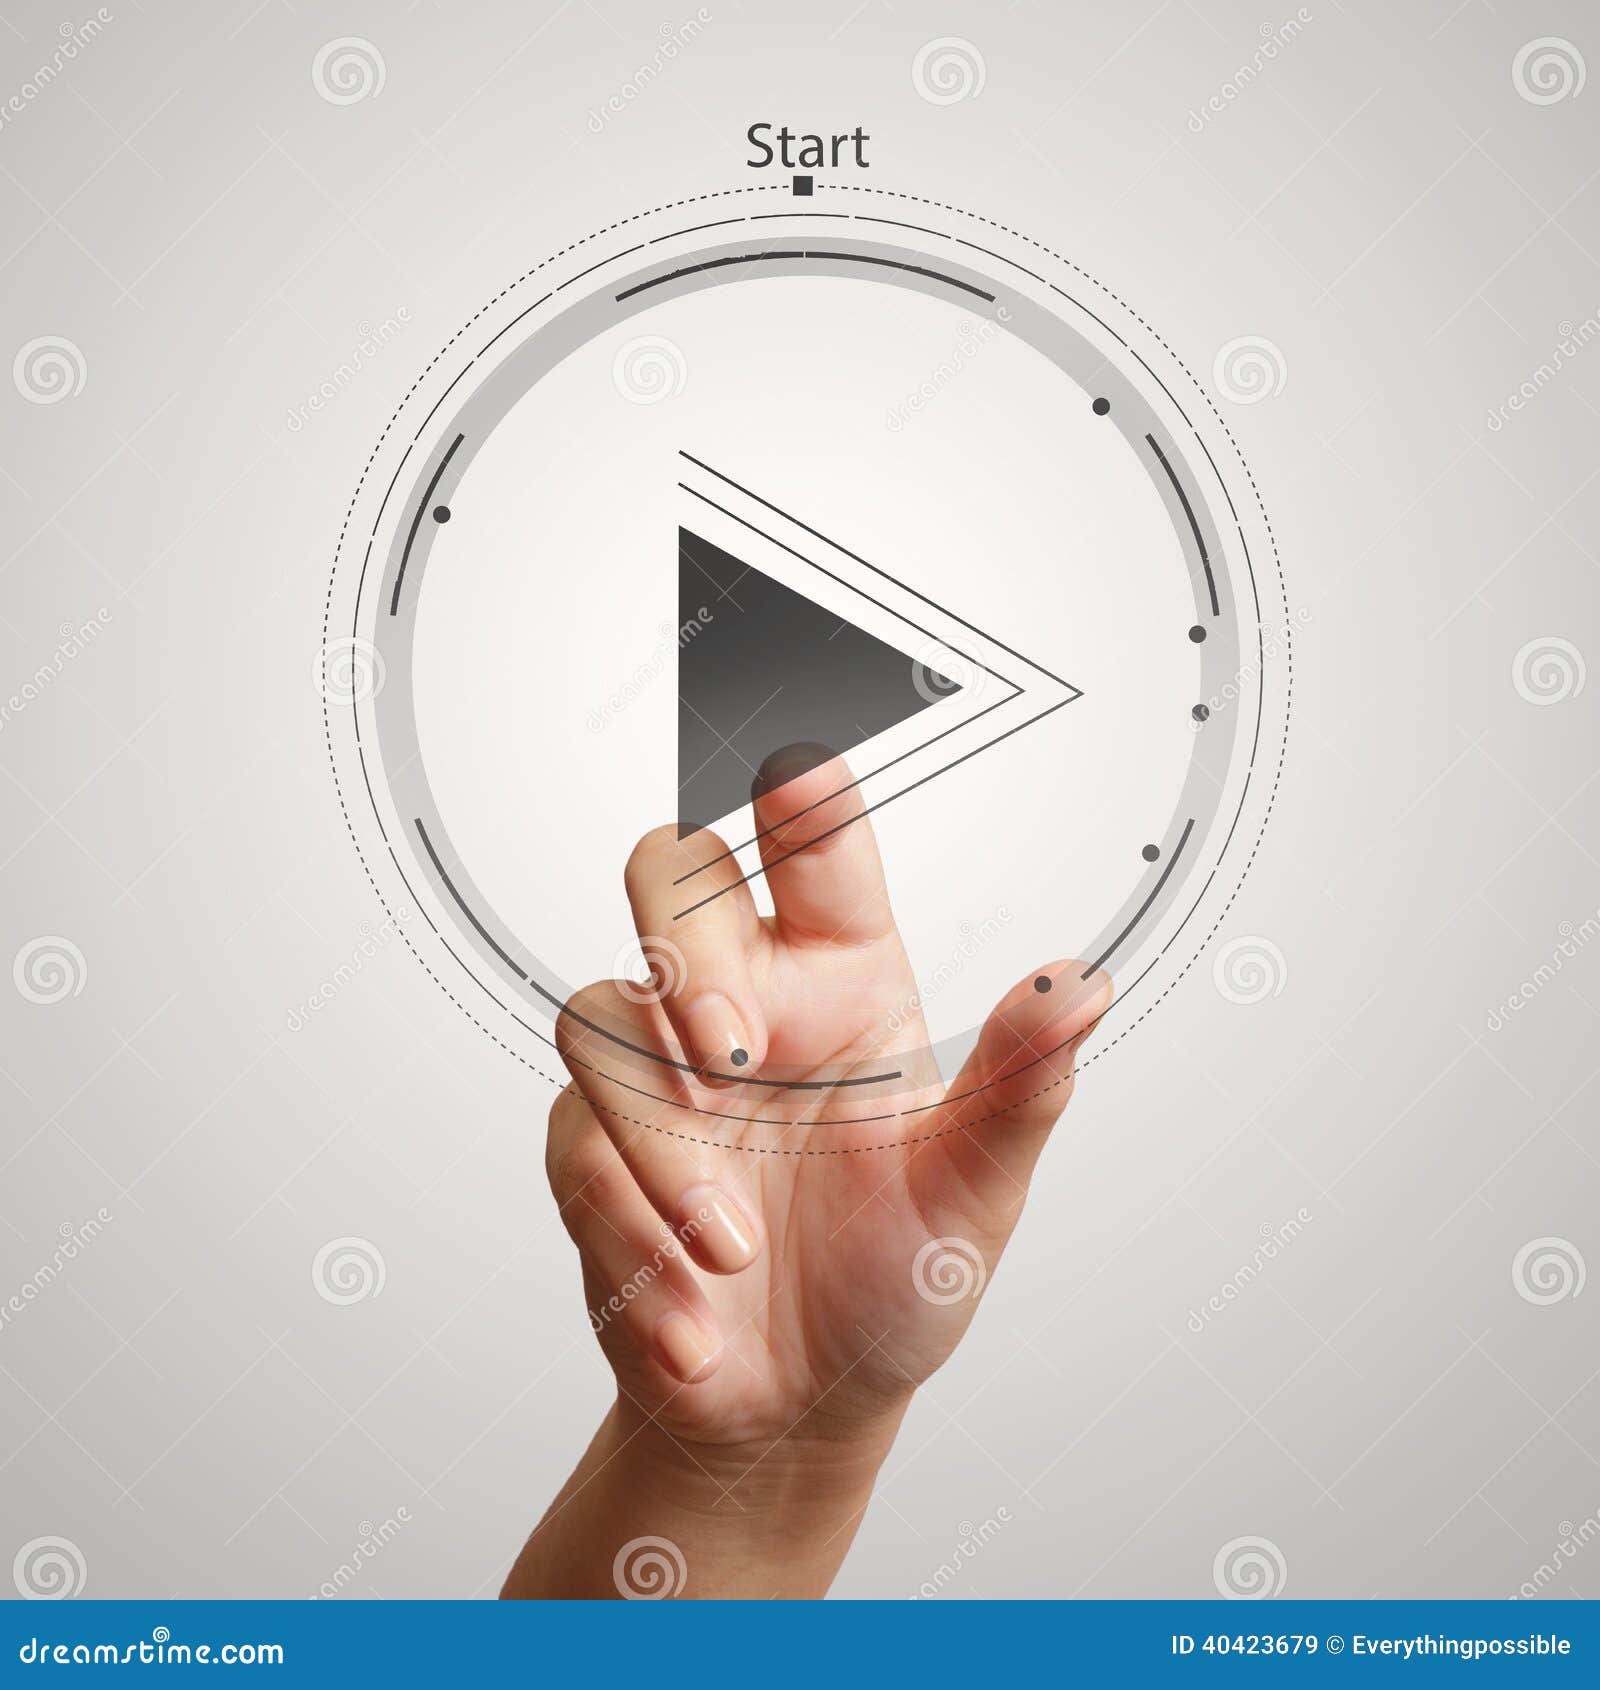 Hand Press Play Button Sign Start Stock Photo 250971760